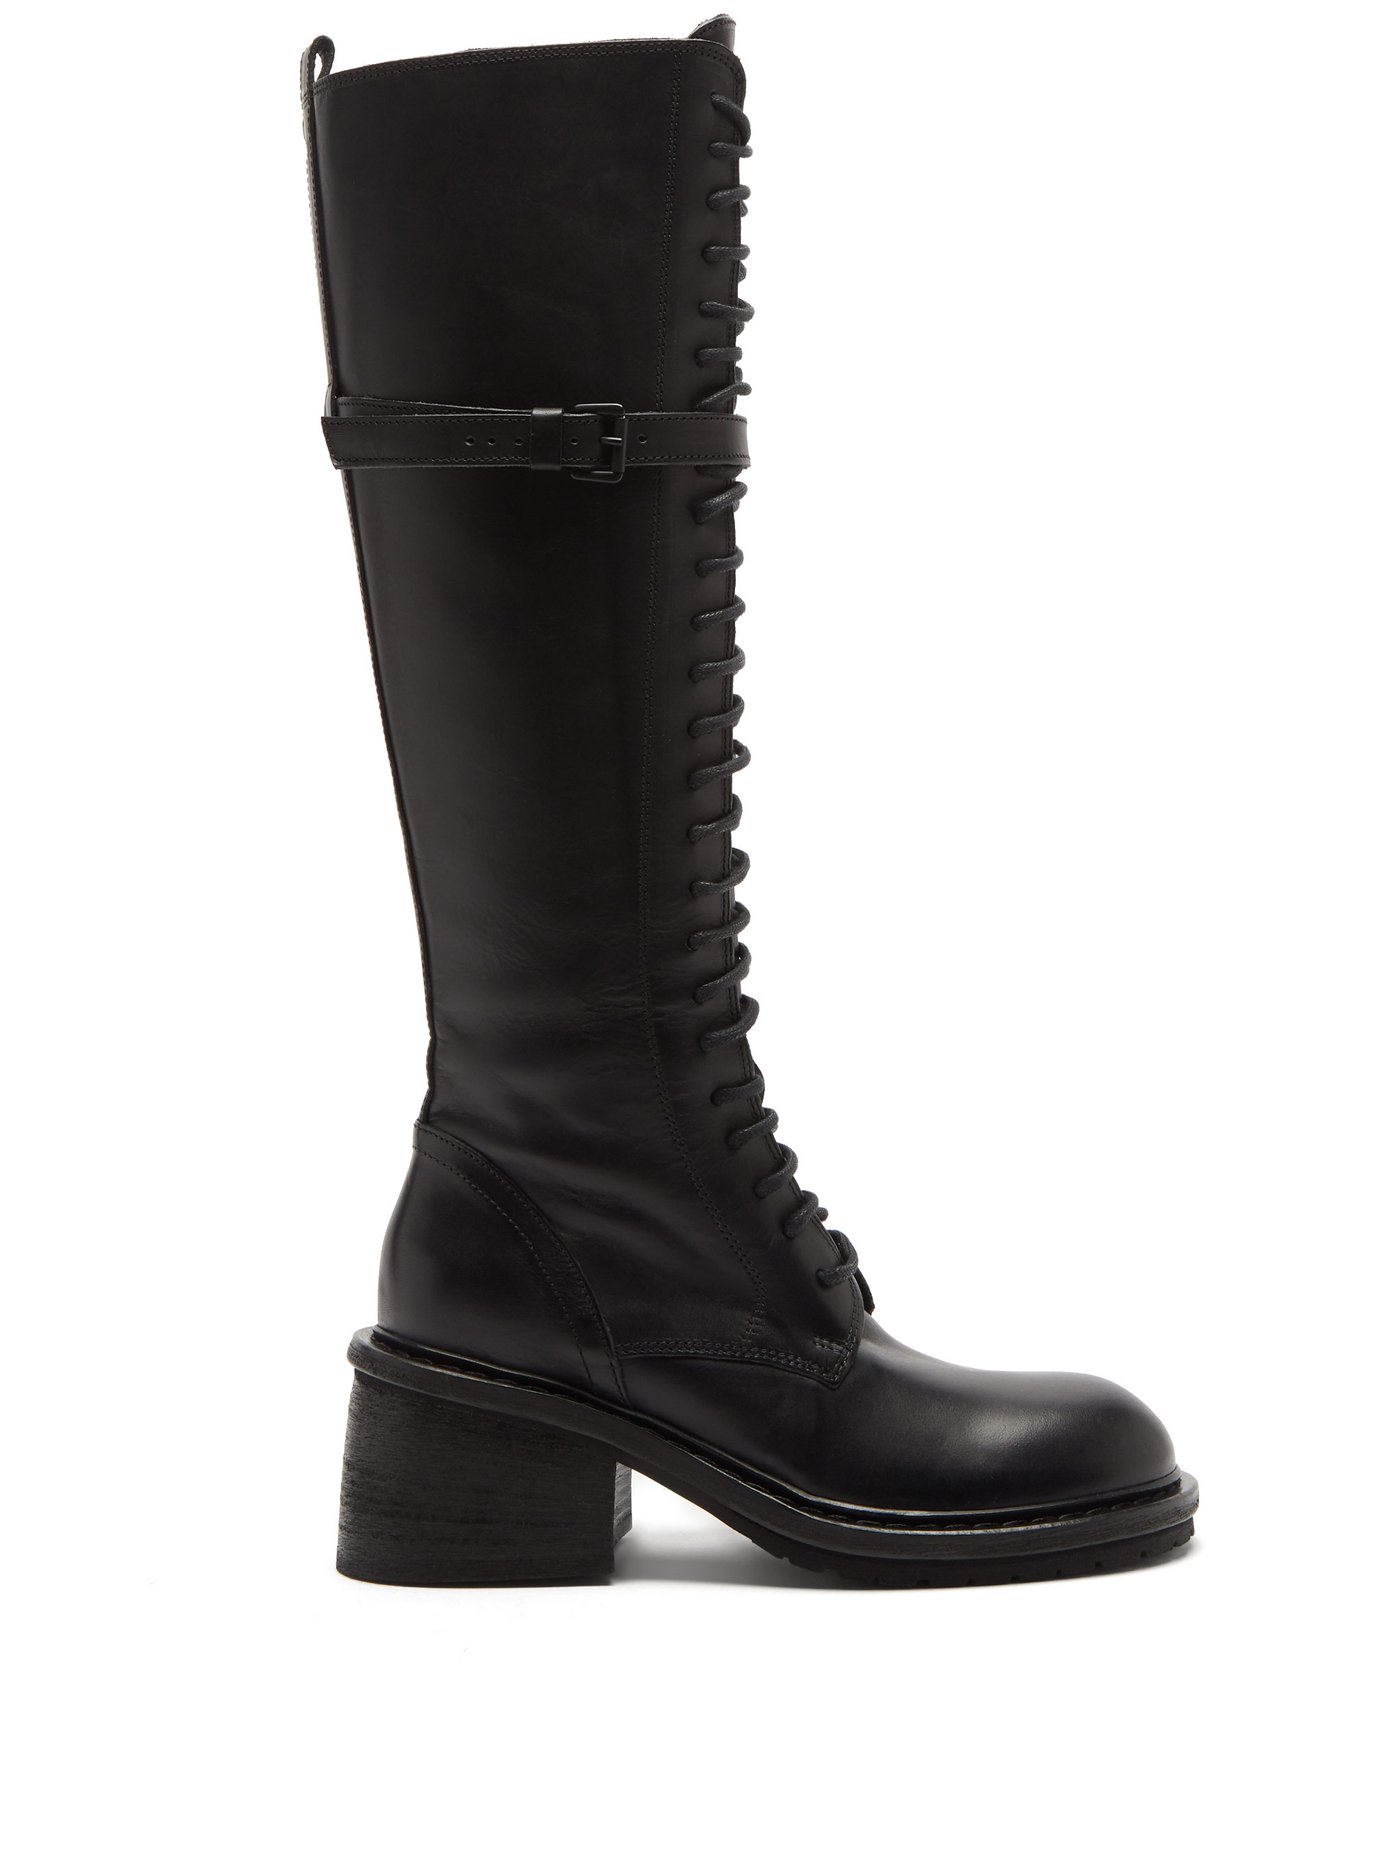 knee high leather boots lace up